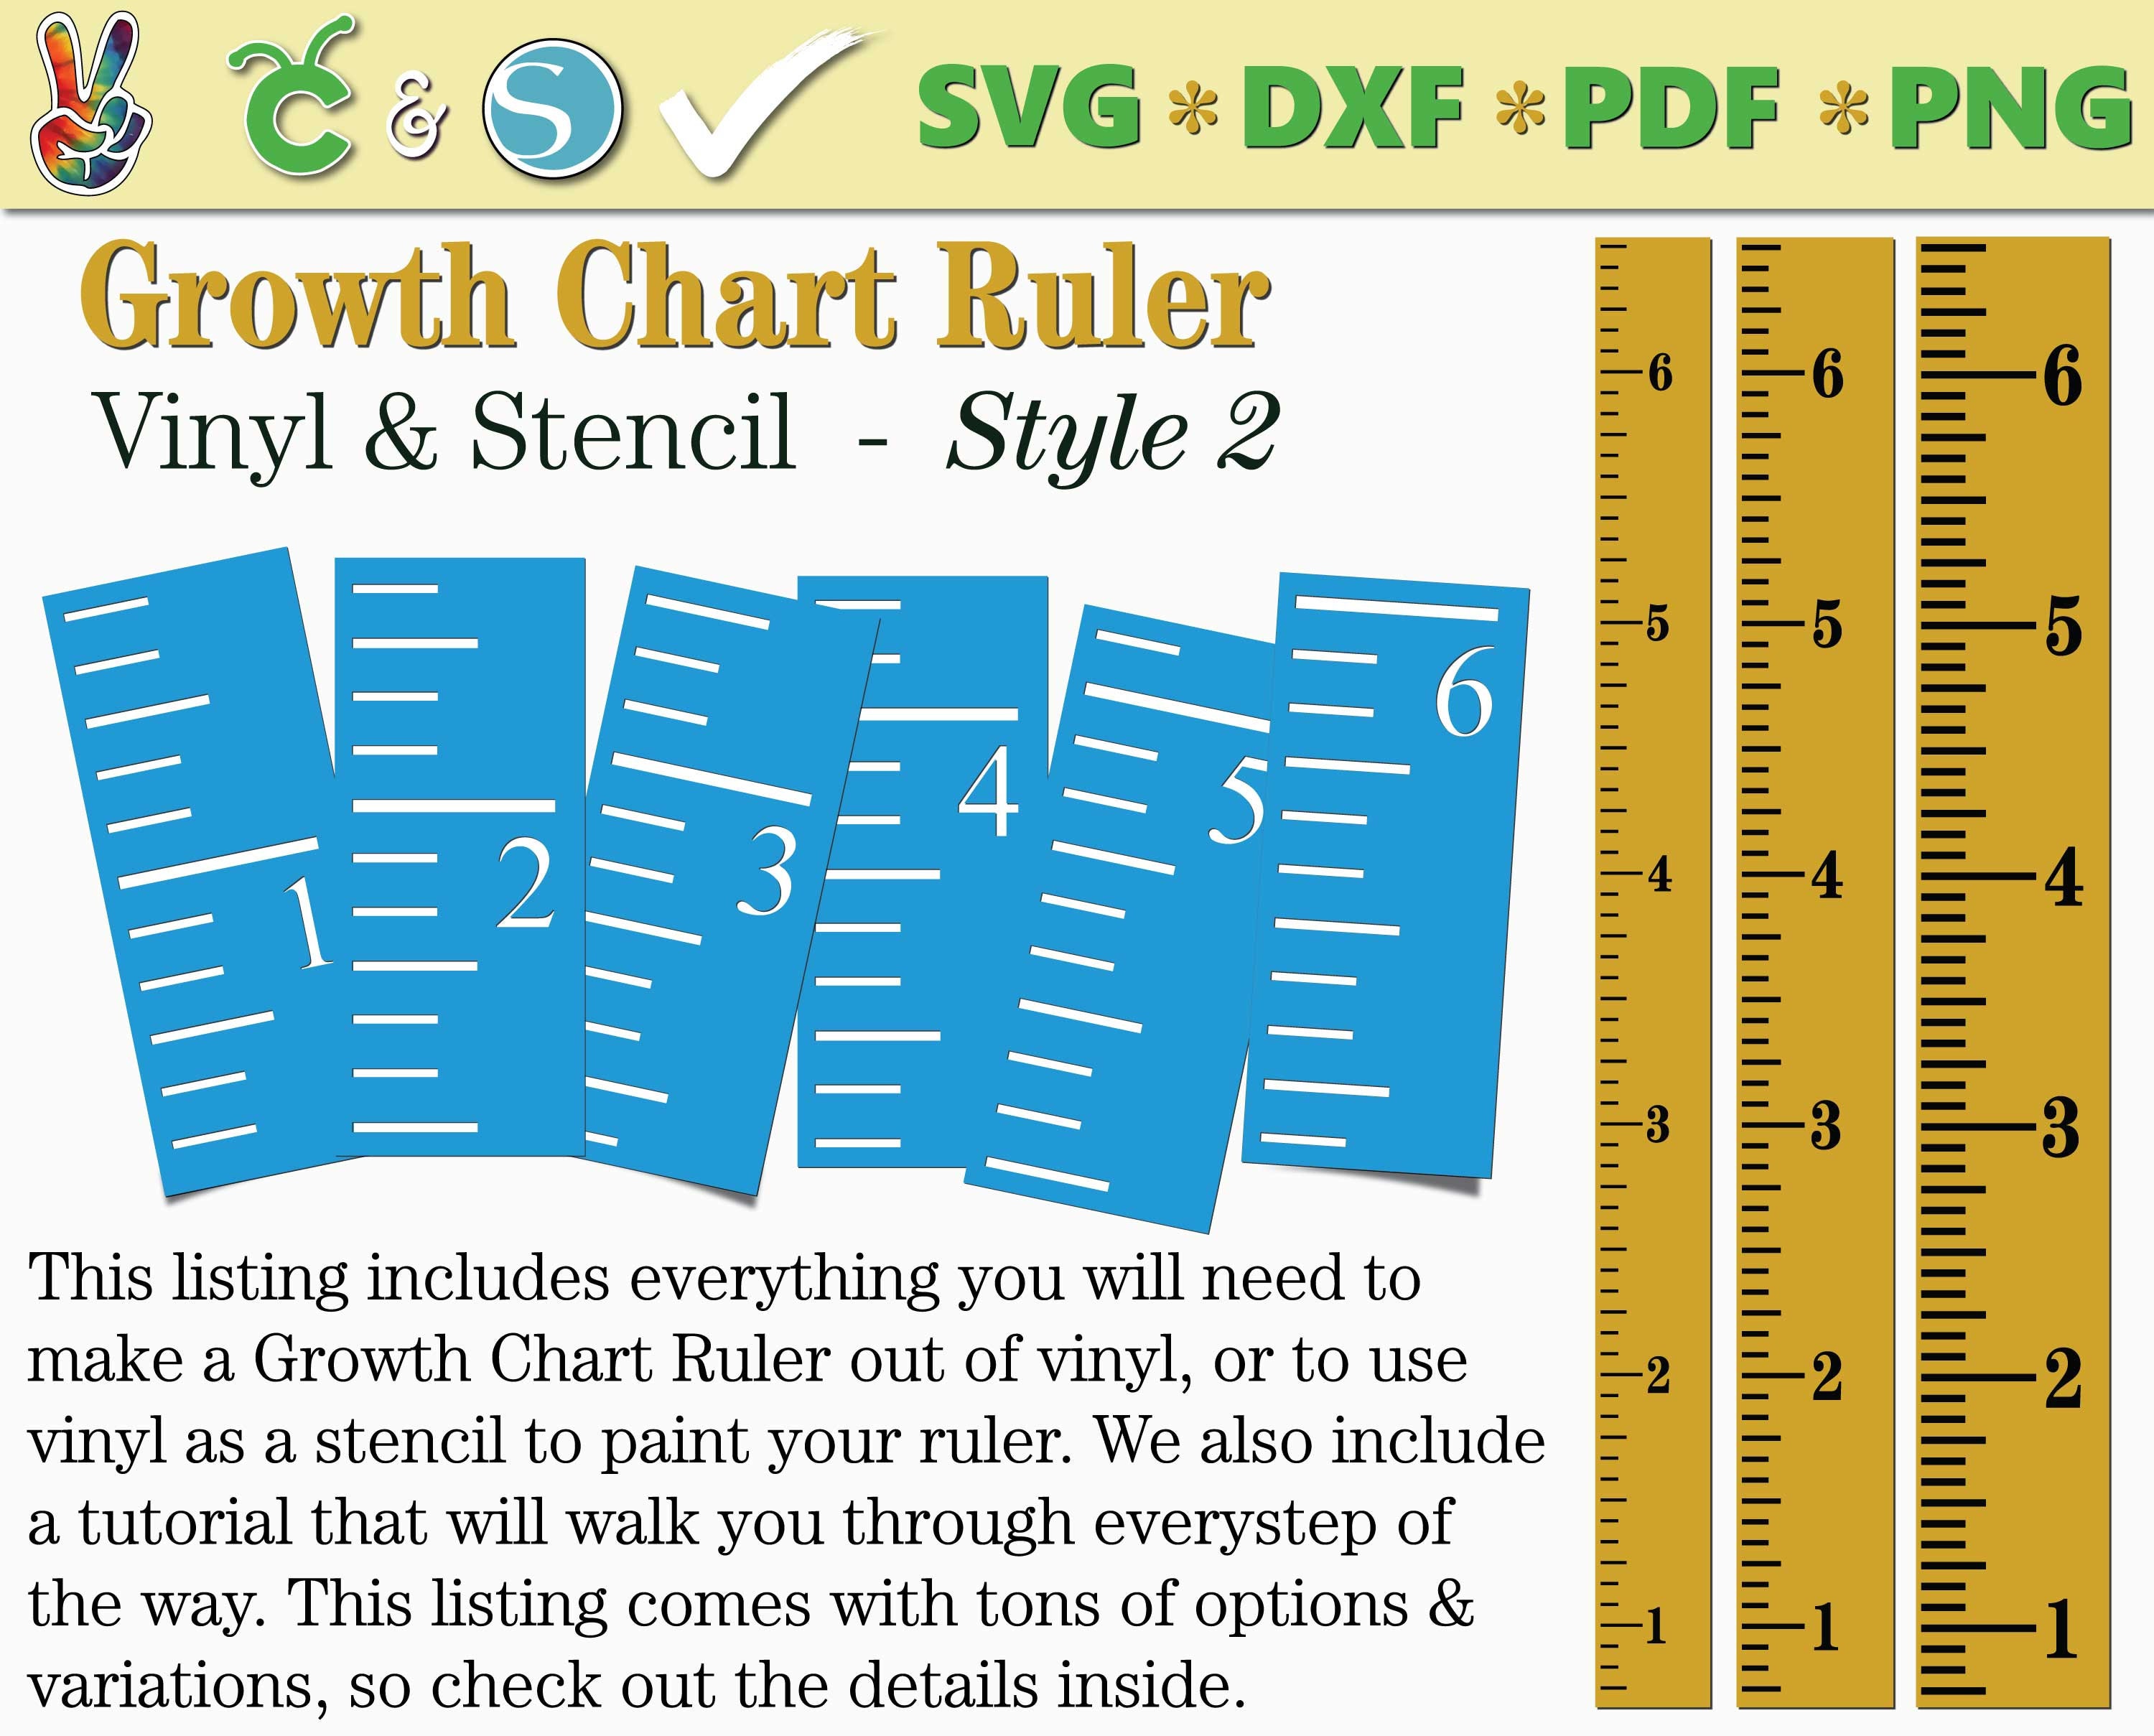 Download Growth Chart Ruler Stencil File Growth Chart Ruler Vinyl ...